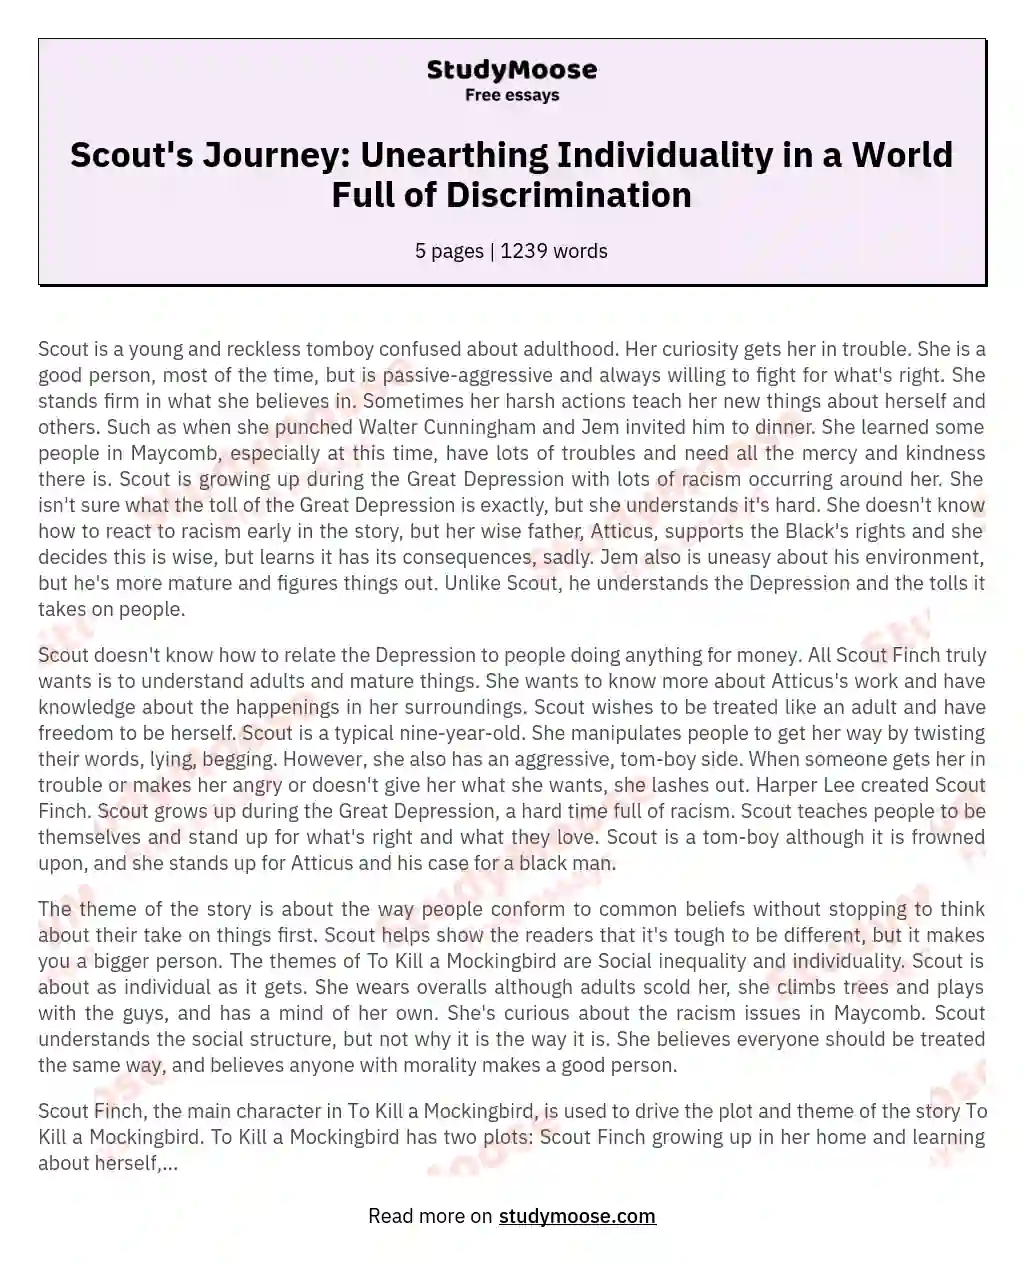 Scout's Journey: Unearthing Individuality in a World Full of Discrimination essay